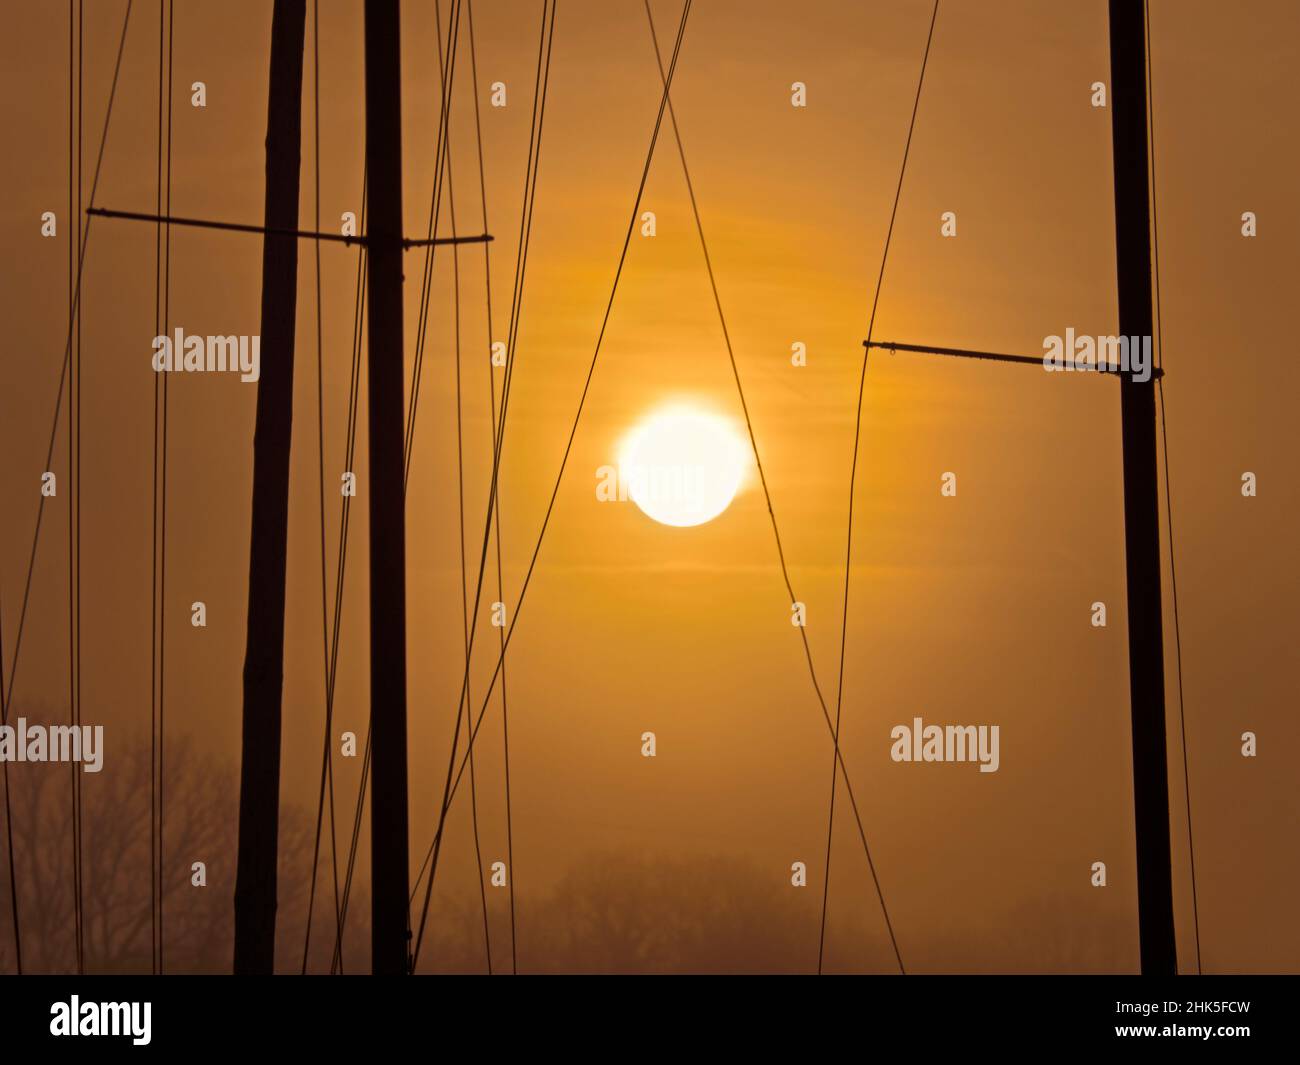 Big, orange sun; an abstract array of yacht masts at sunrise in Abingdon Marina by the Thames. Stock Photo